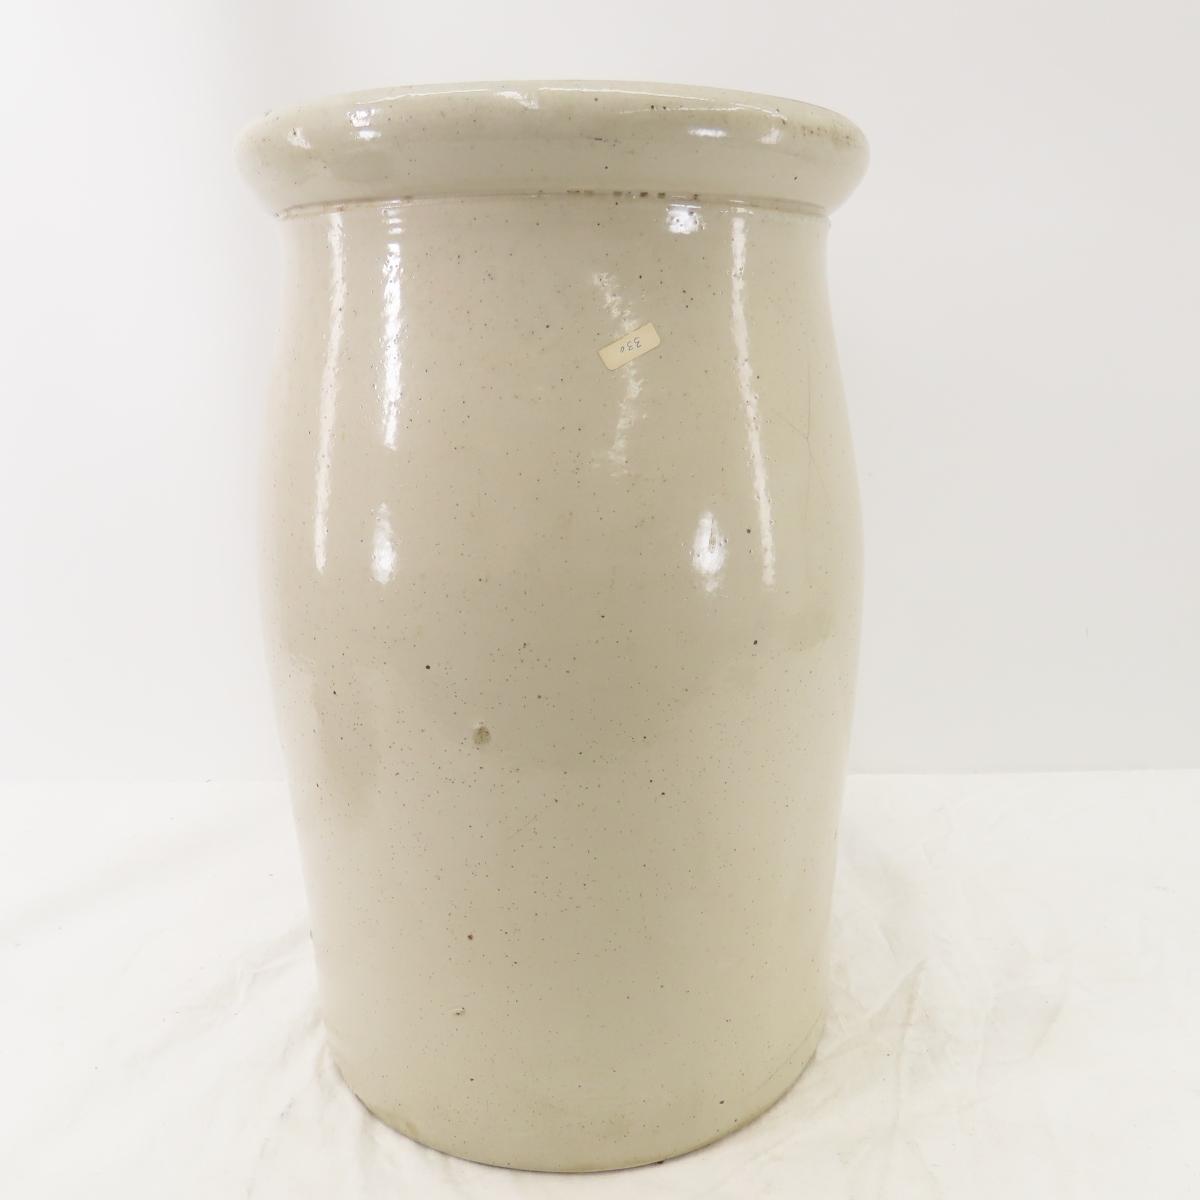 5 Gallon Red Wing Union Stoneware Butter Churn